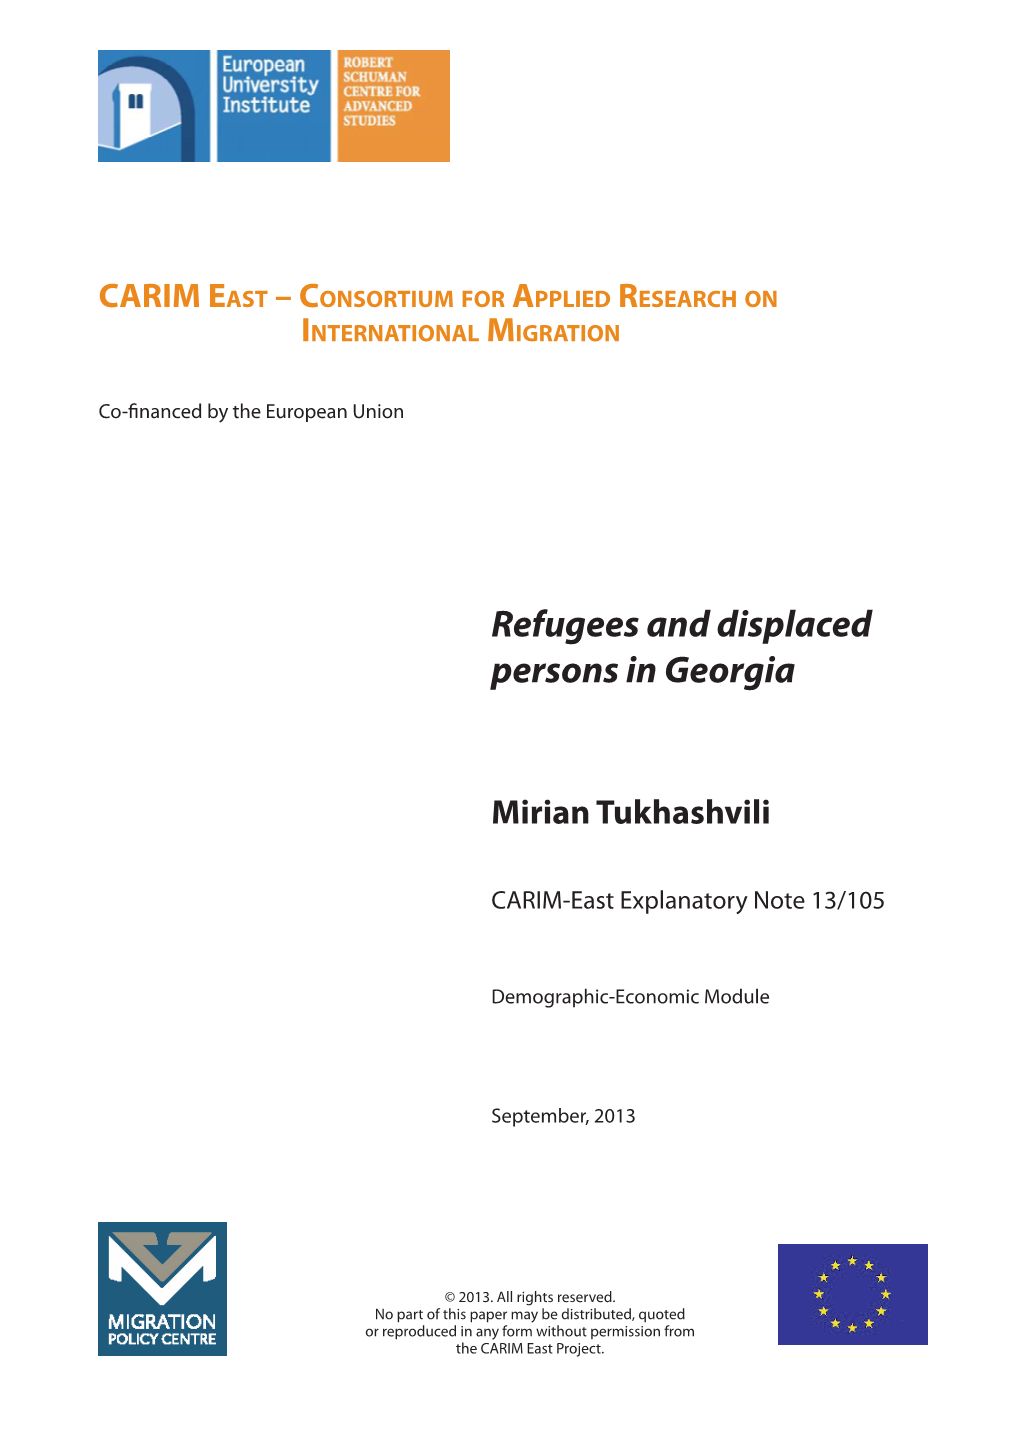 Refugees and Displaced Persons in Georgia